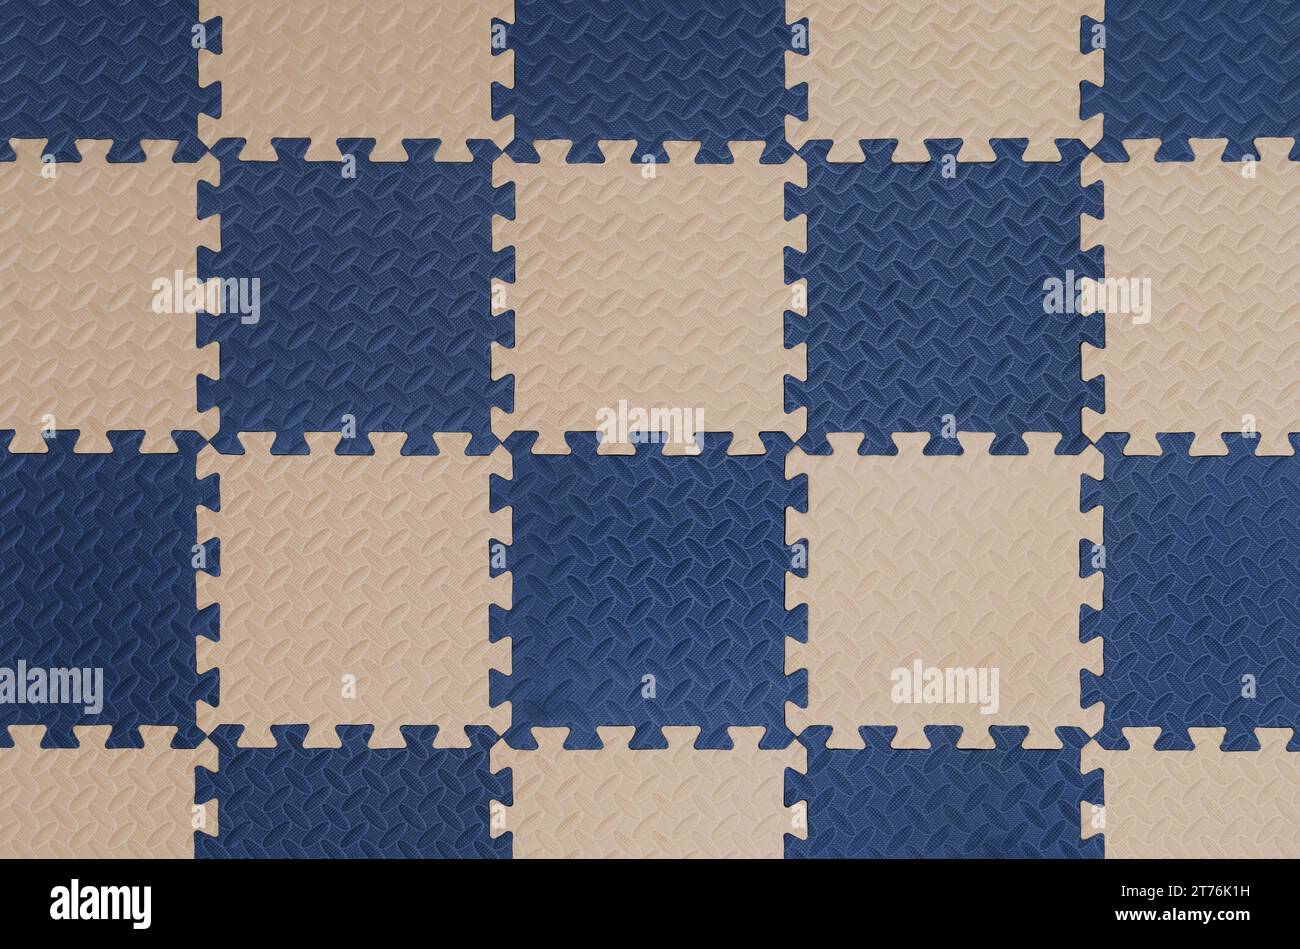 foam flooring tiles or jigsaw mat for baby. background and texture Stock Photo